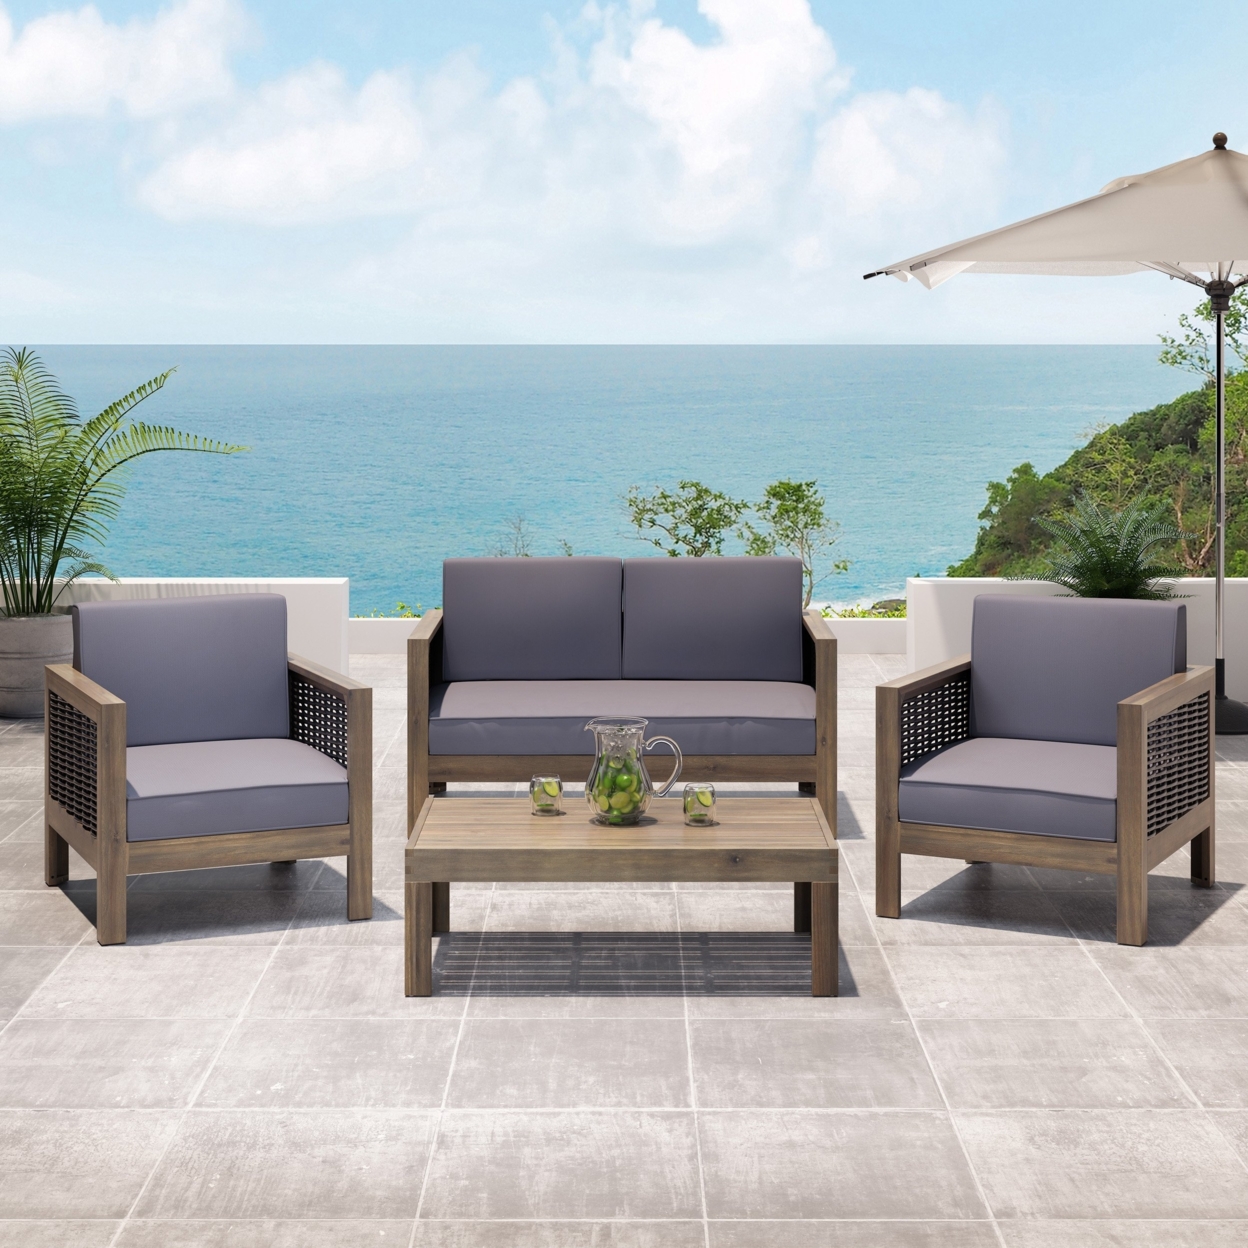 Mayes Outdoor 4 Seater Acacia Wood Chat Set With Wicker Accents - Gray/mixed Gray/dark Gray